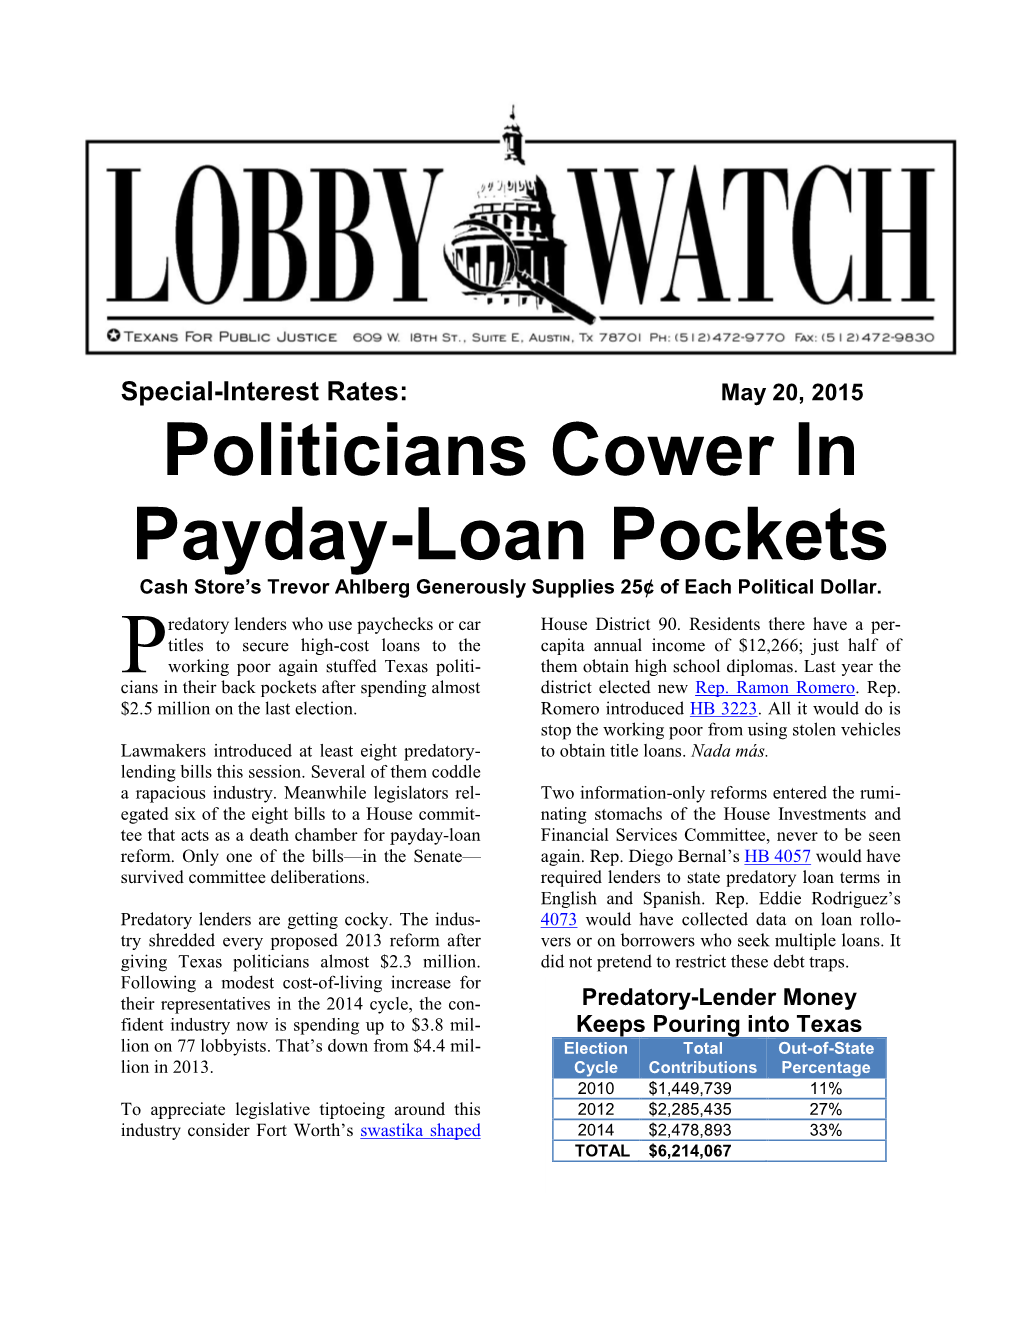 Politicians Cower in Payday-Loan Pockets Cash Store’S Trevor Ahlberg Generously Supplies 25¢ of Each Political Dollar